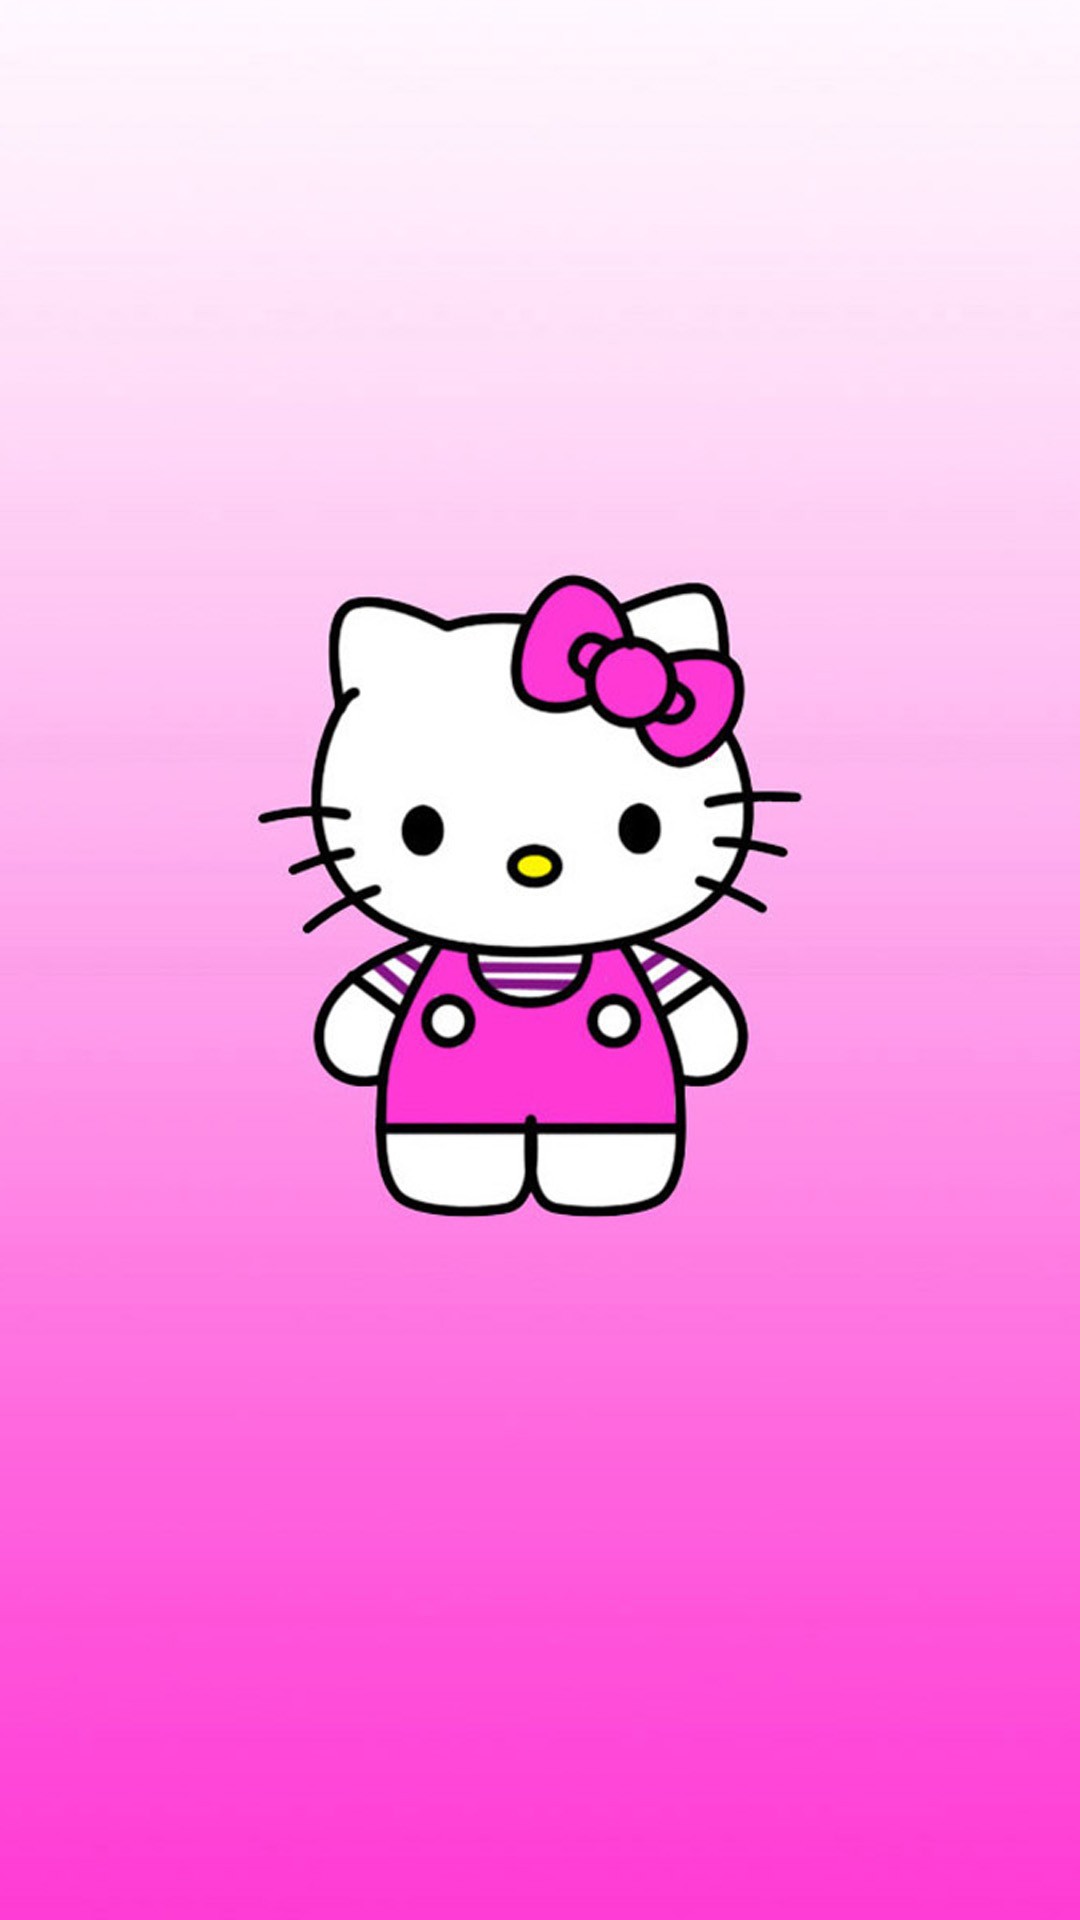 Sanrio Hello Kitty Wallpaper Android with resolution 1080X1920 pixel. You can make this wallpaper for your Android backgrounds, Tablet, Smartphones Screensavers and Mobile Phone Lock Screen